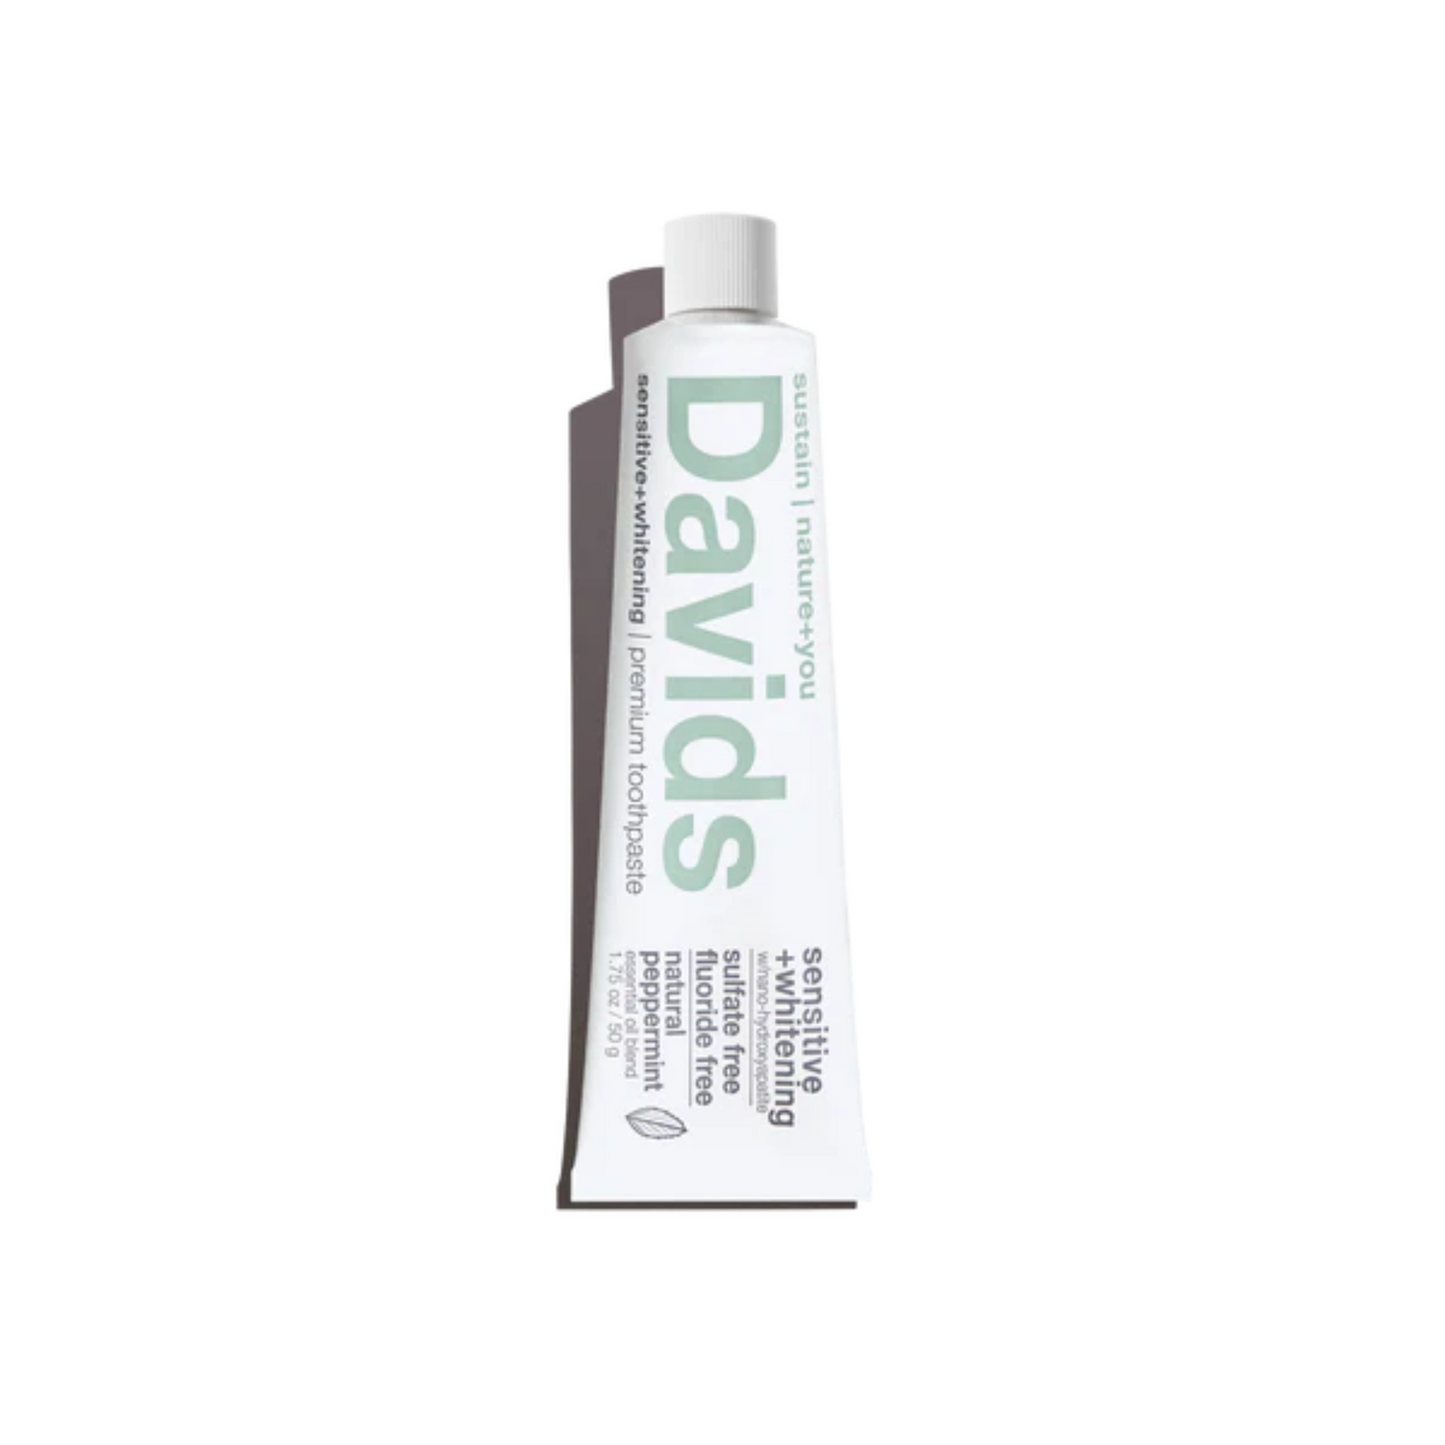 Primary Image of Sensitive + Whitening Peppermint Toothpaste - Travel Size